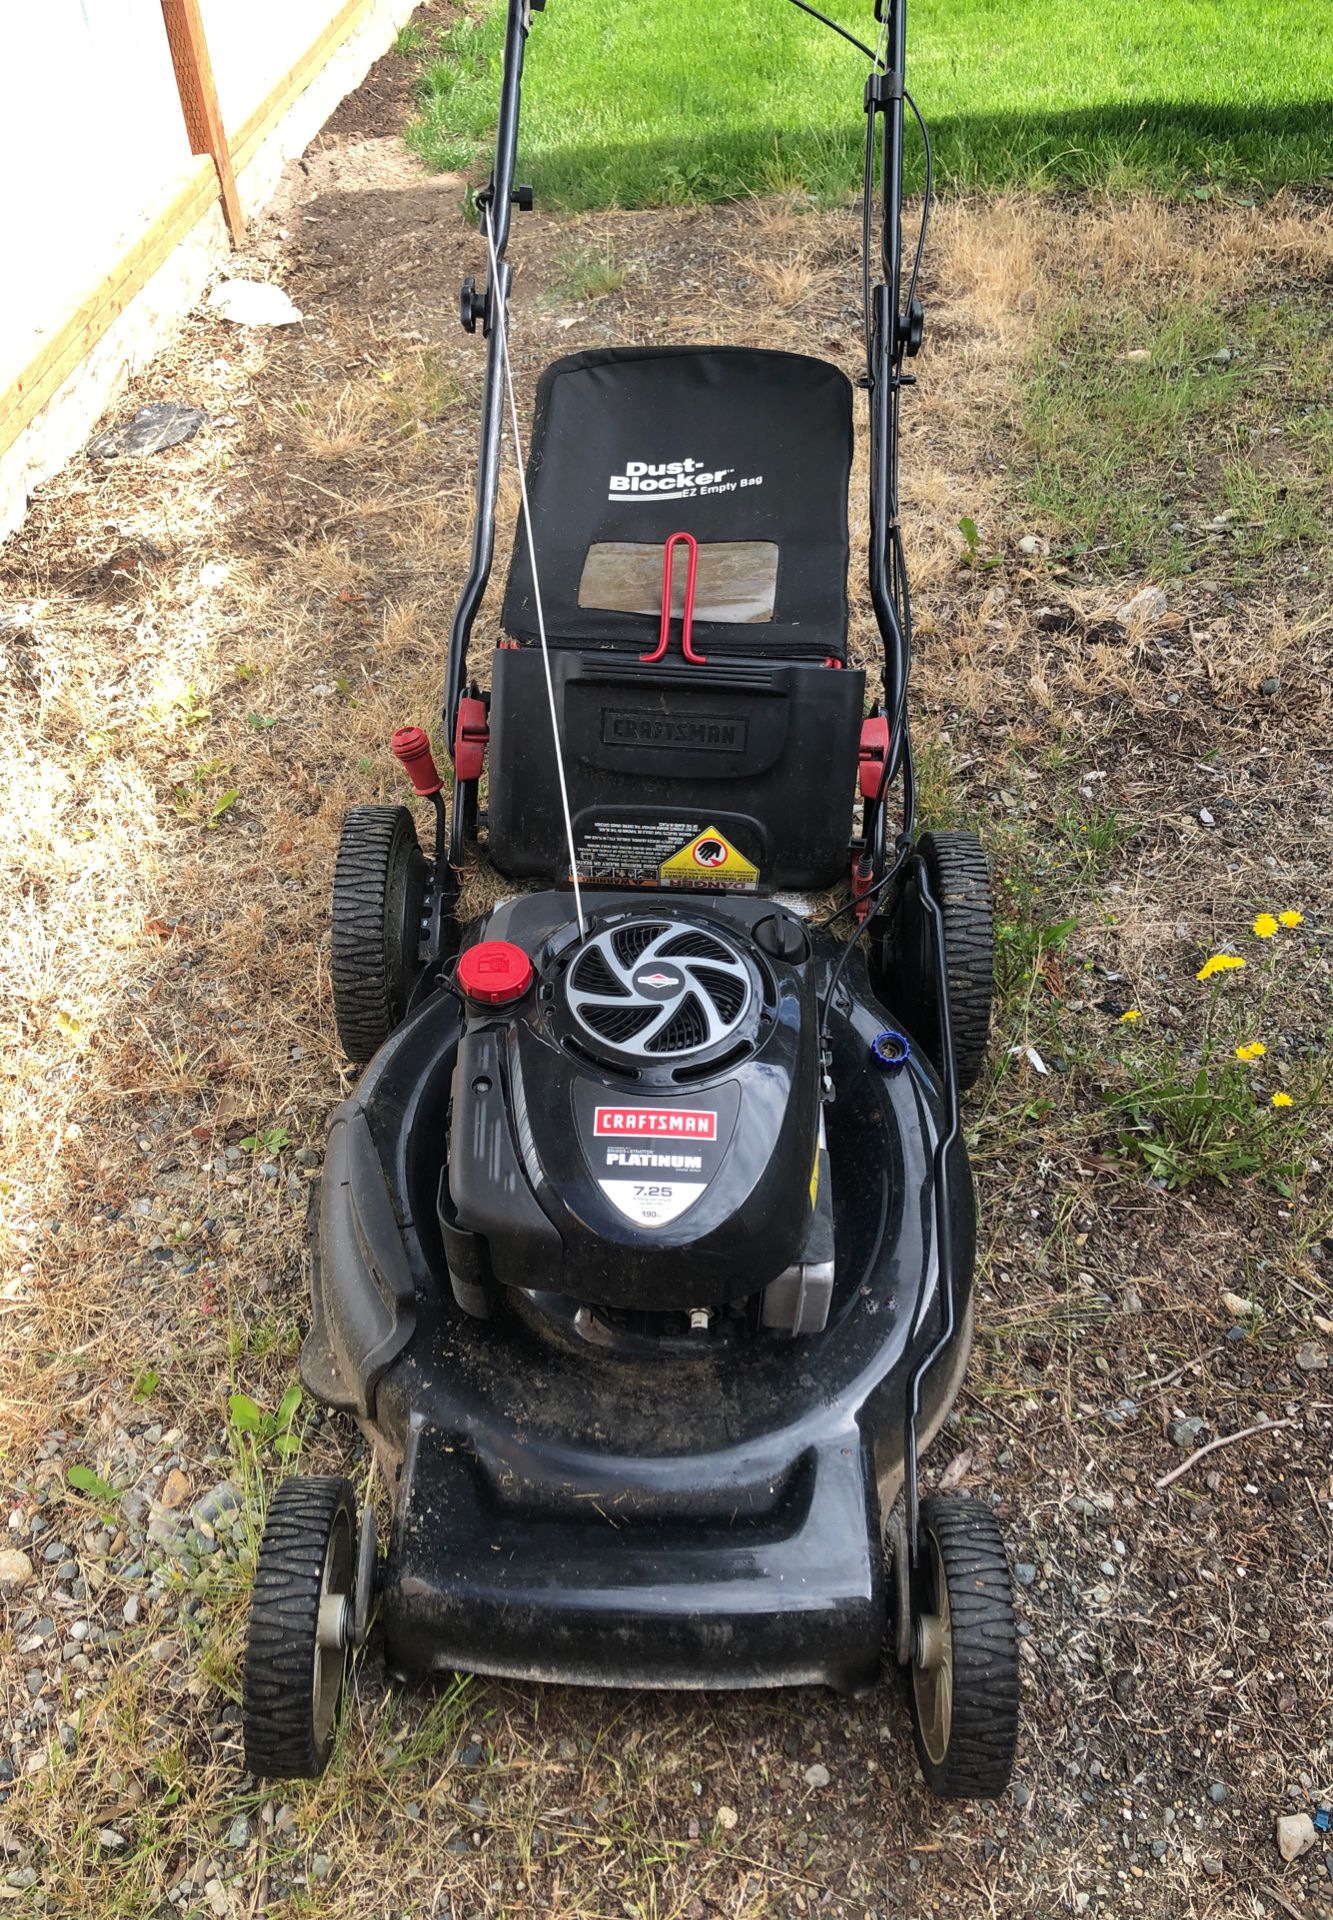 Craftsman Lawn Mower Platinum Gross Cc For Sale In Federal Way